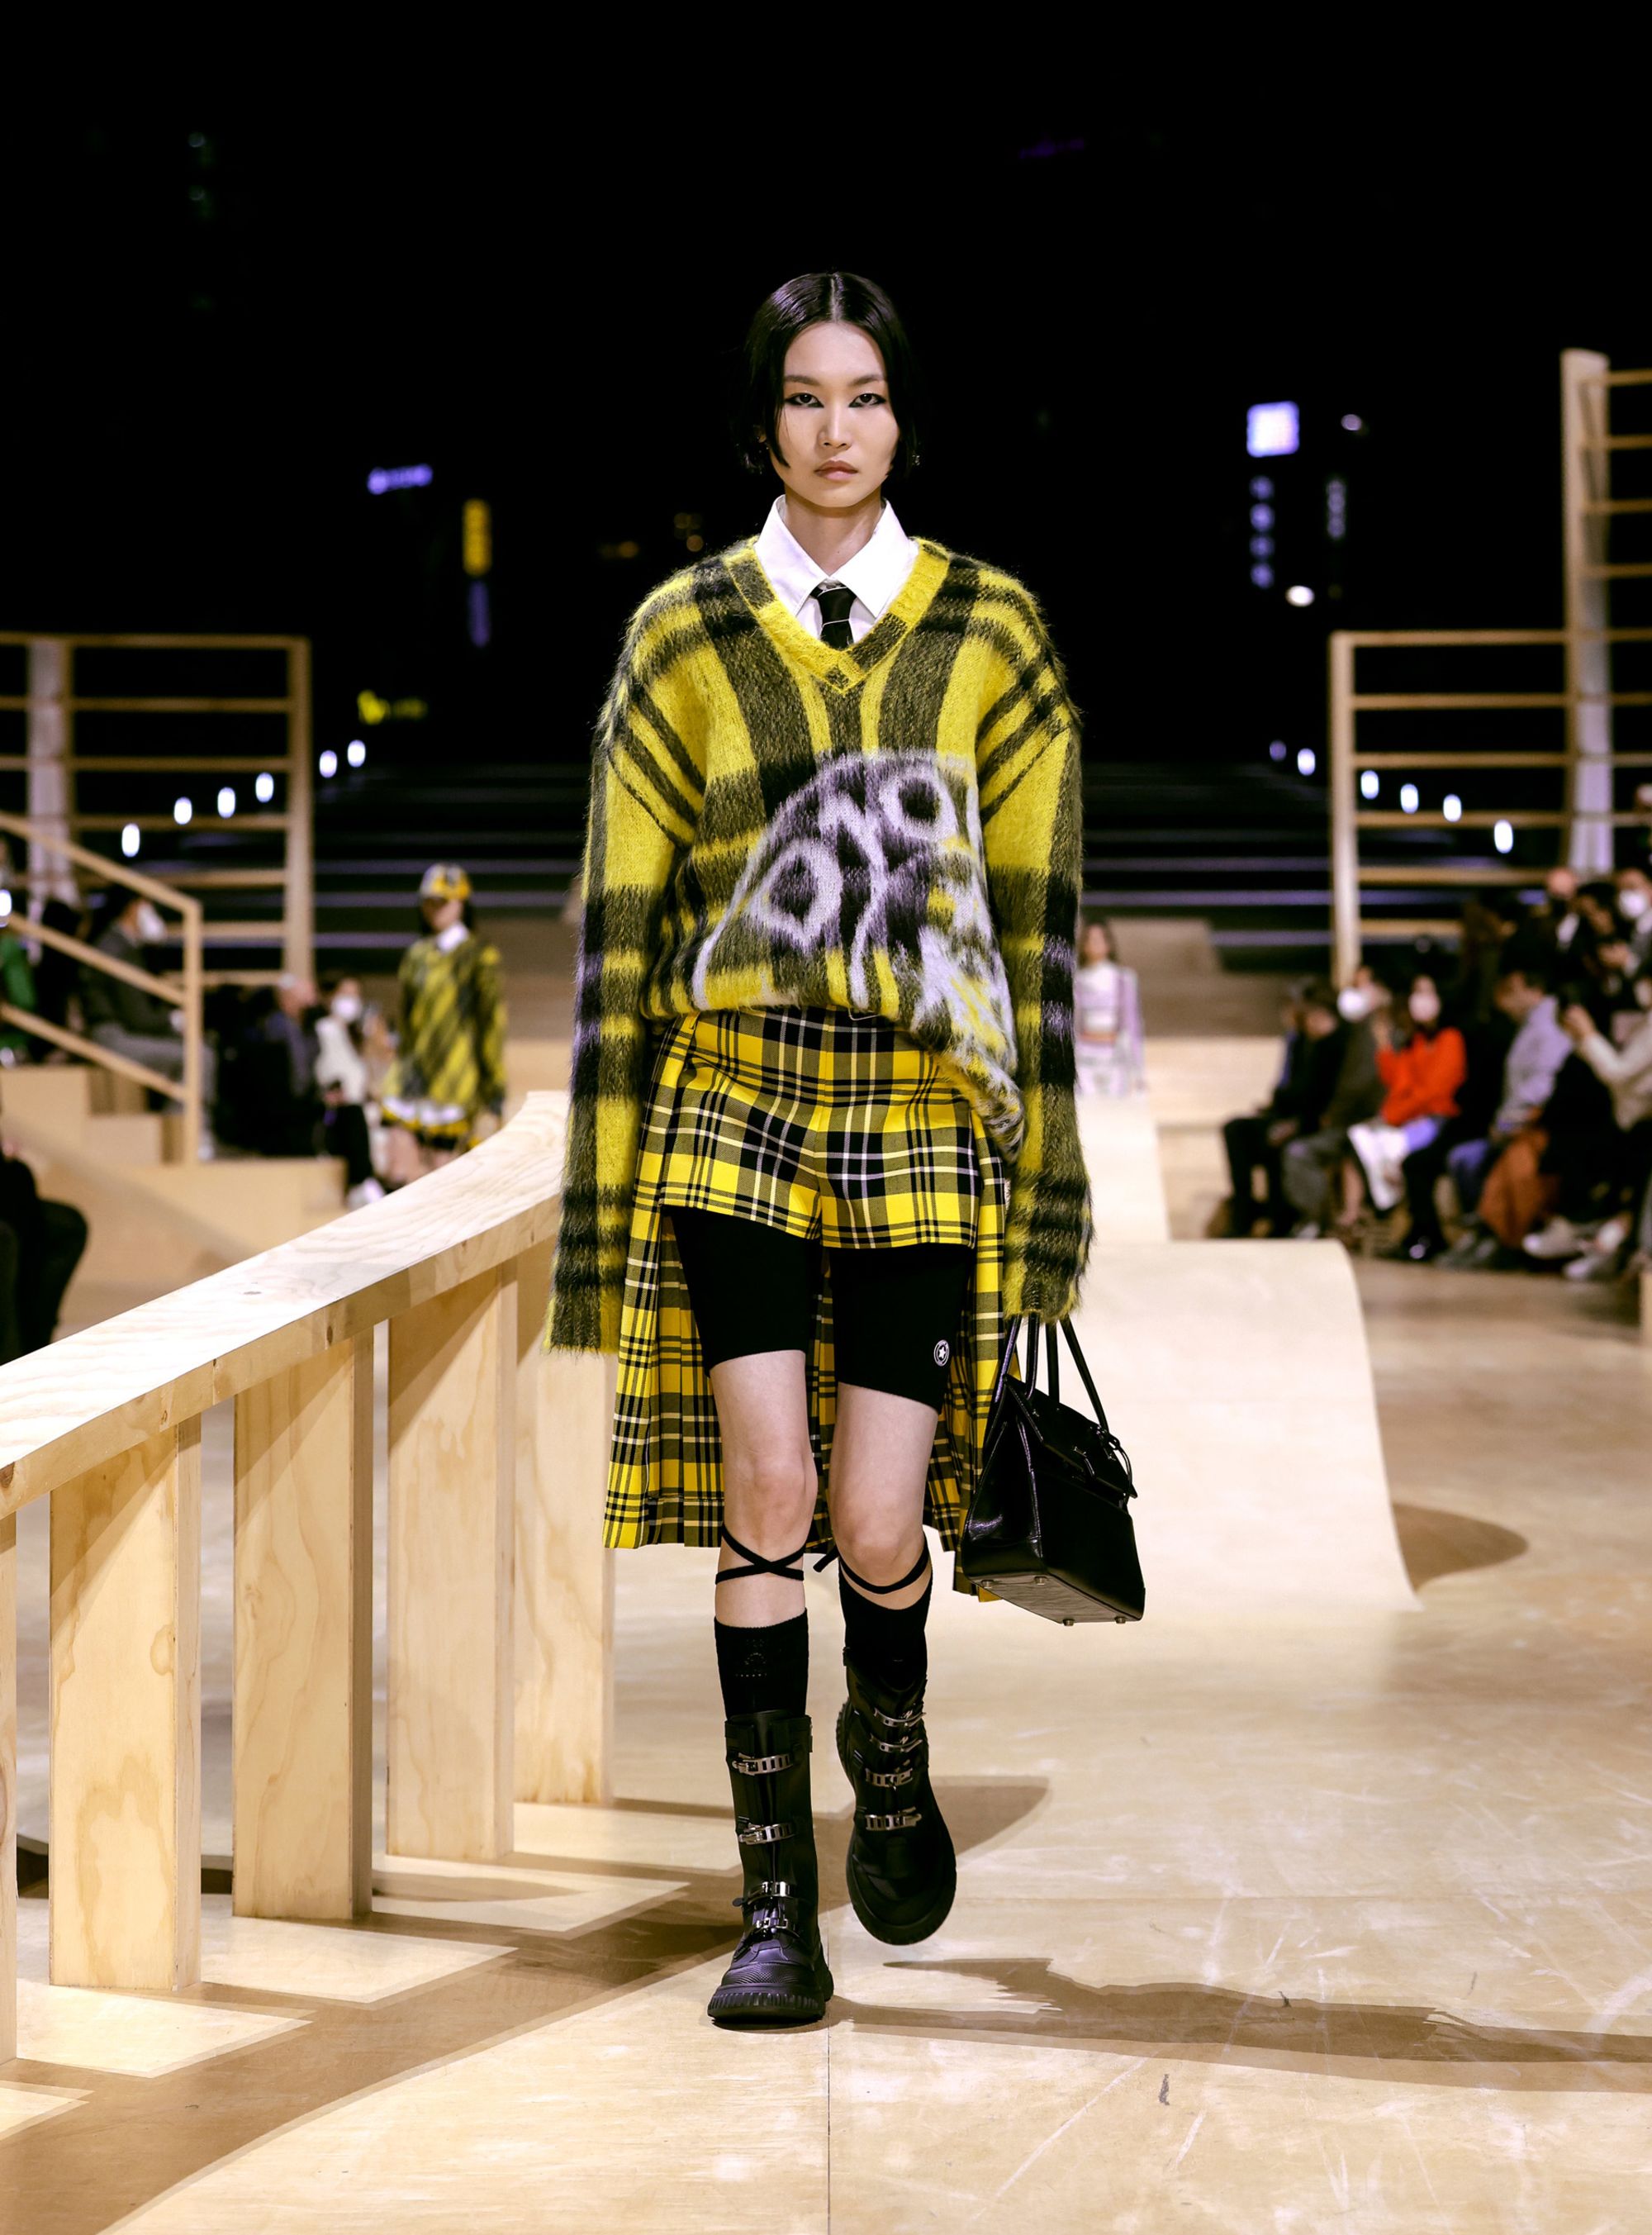 Hoyeon at the Women's Pre-Fall 2023 show in Seoul